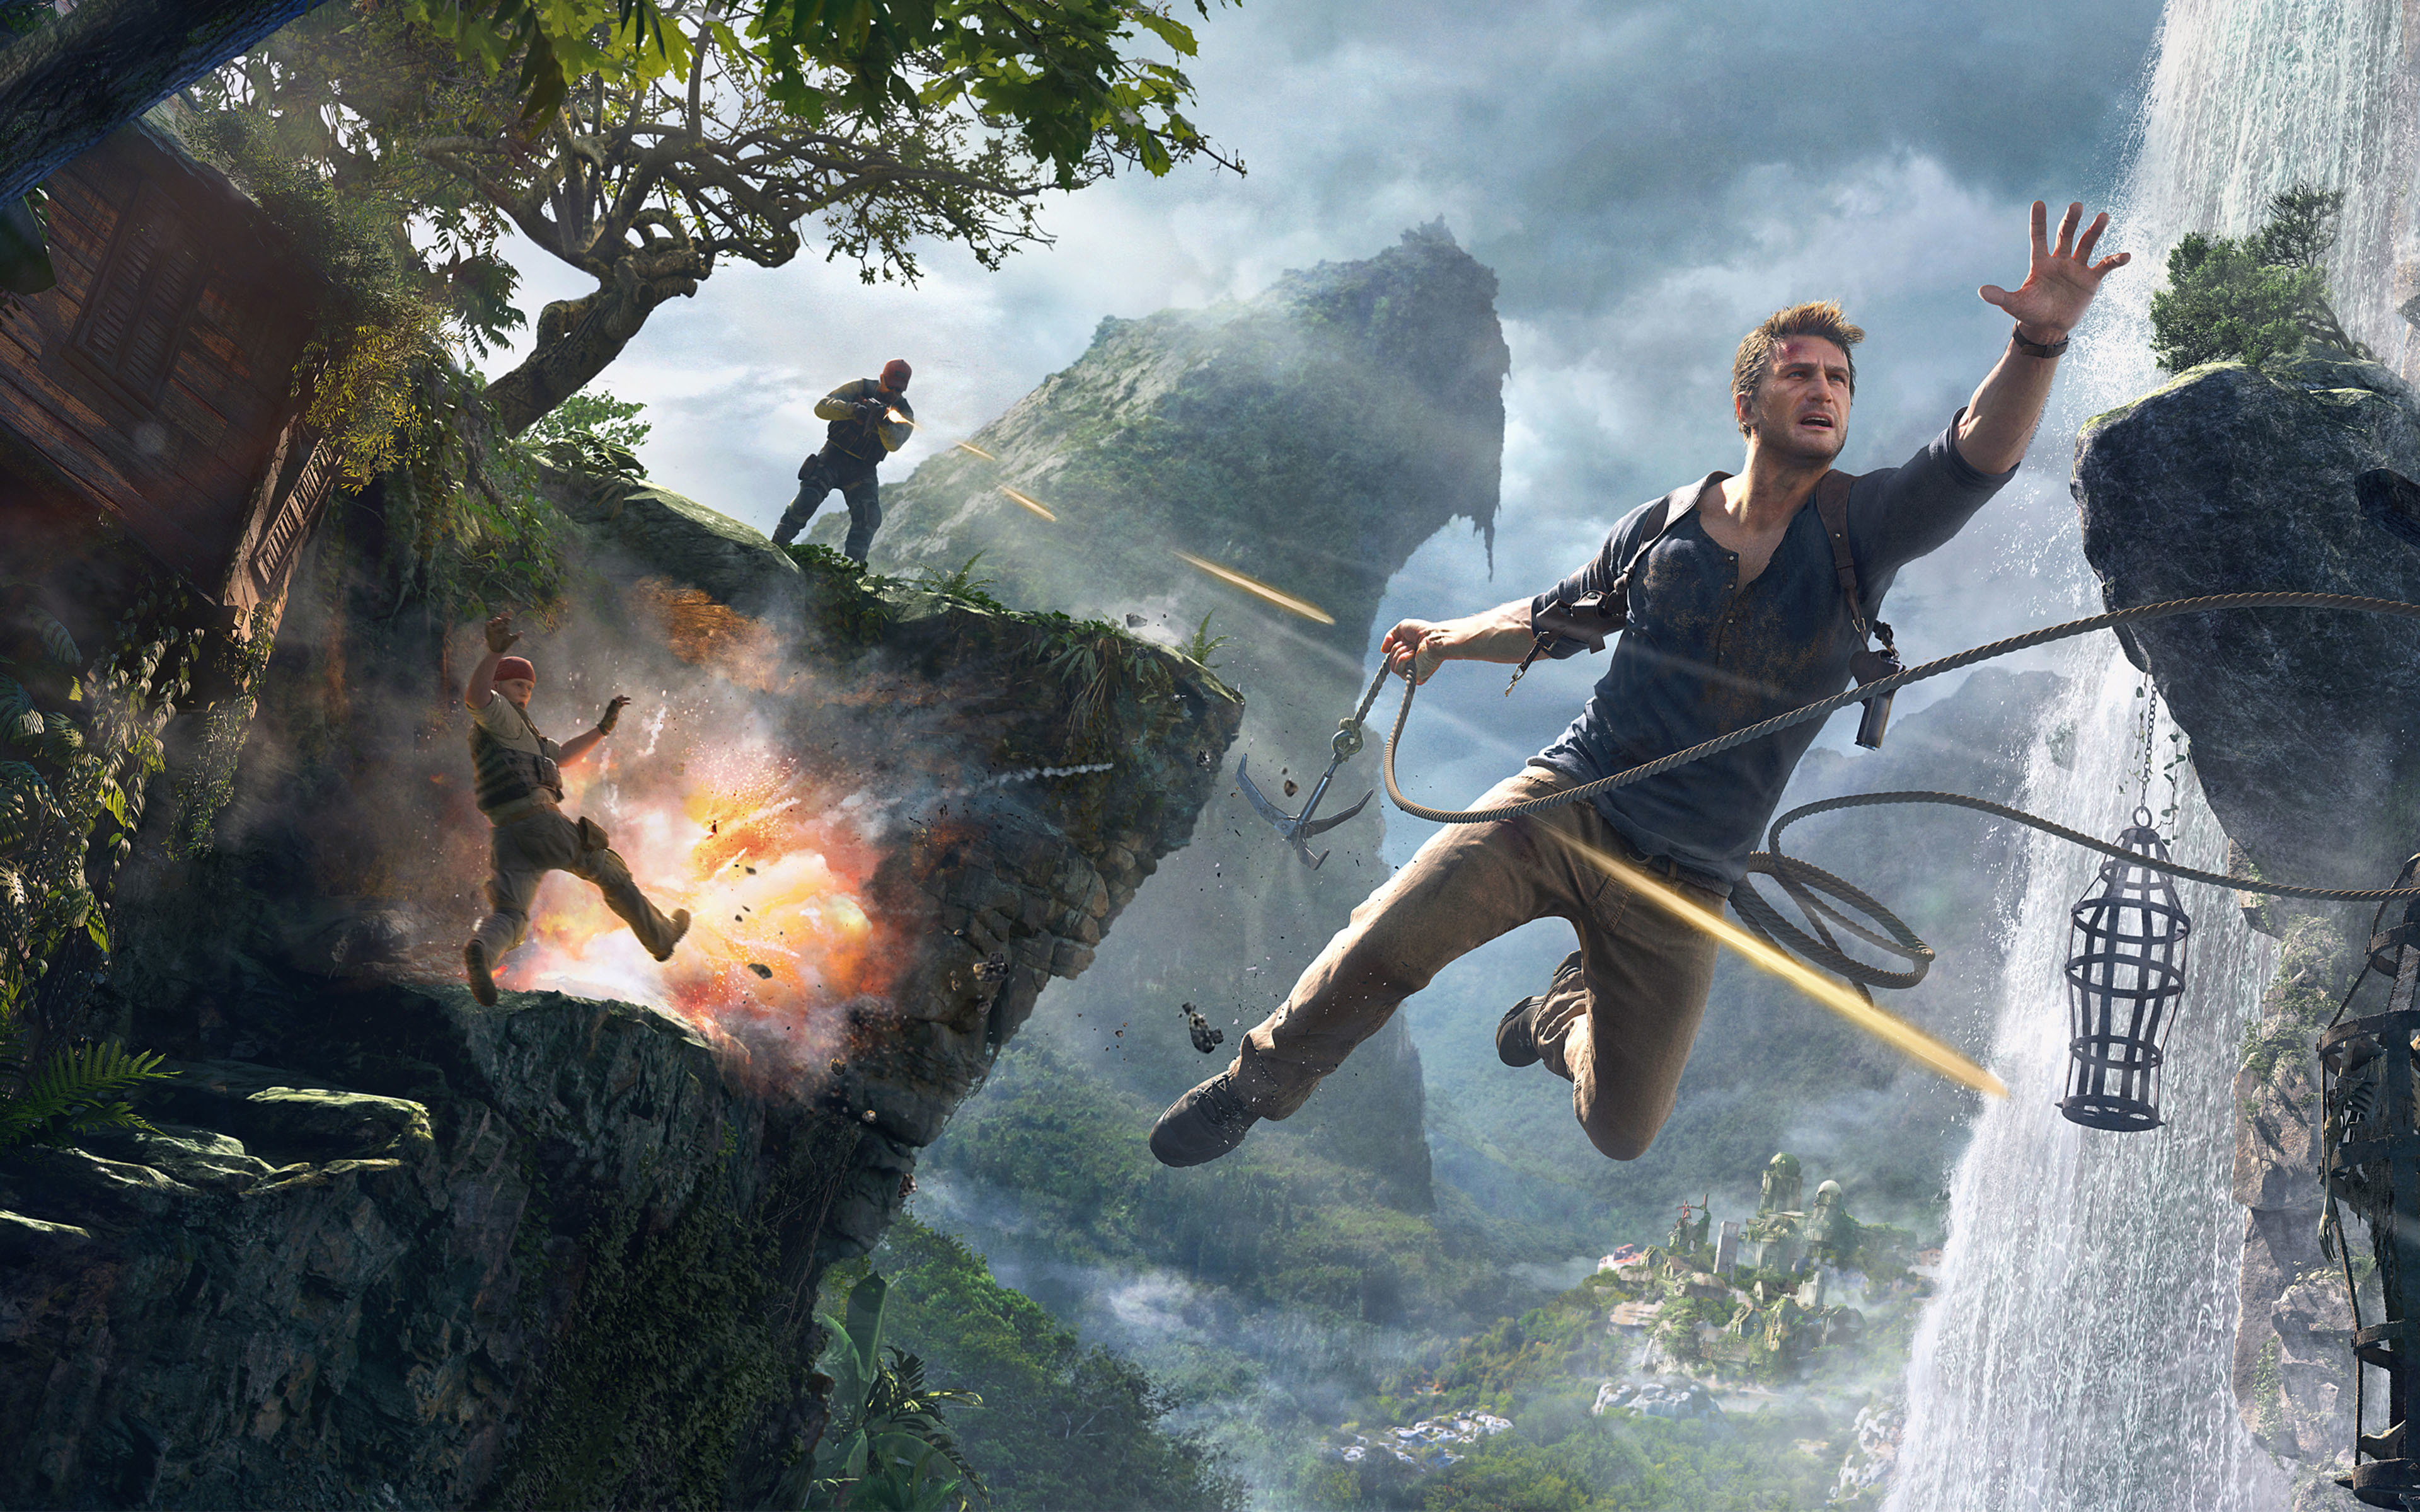 Fun games 4. Uncharted 4. Uncharted 4: a Thief’s end. Uncharted 2022 игра.